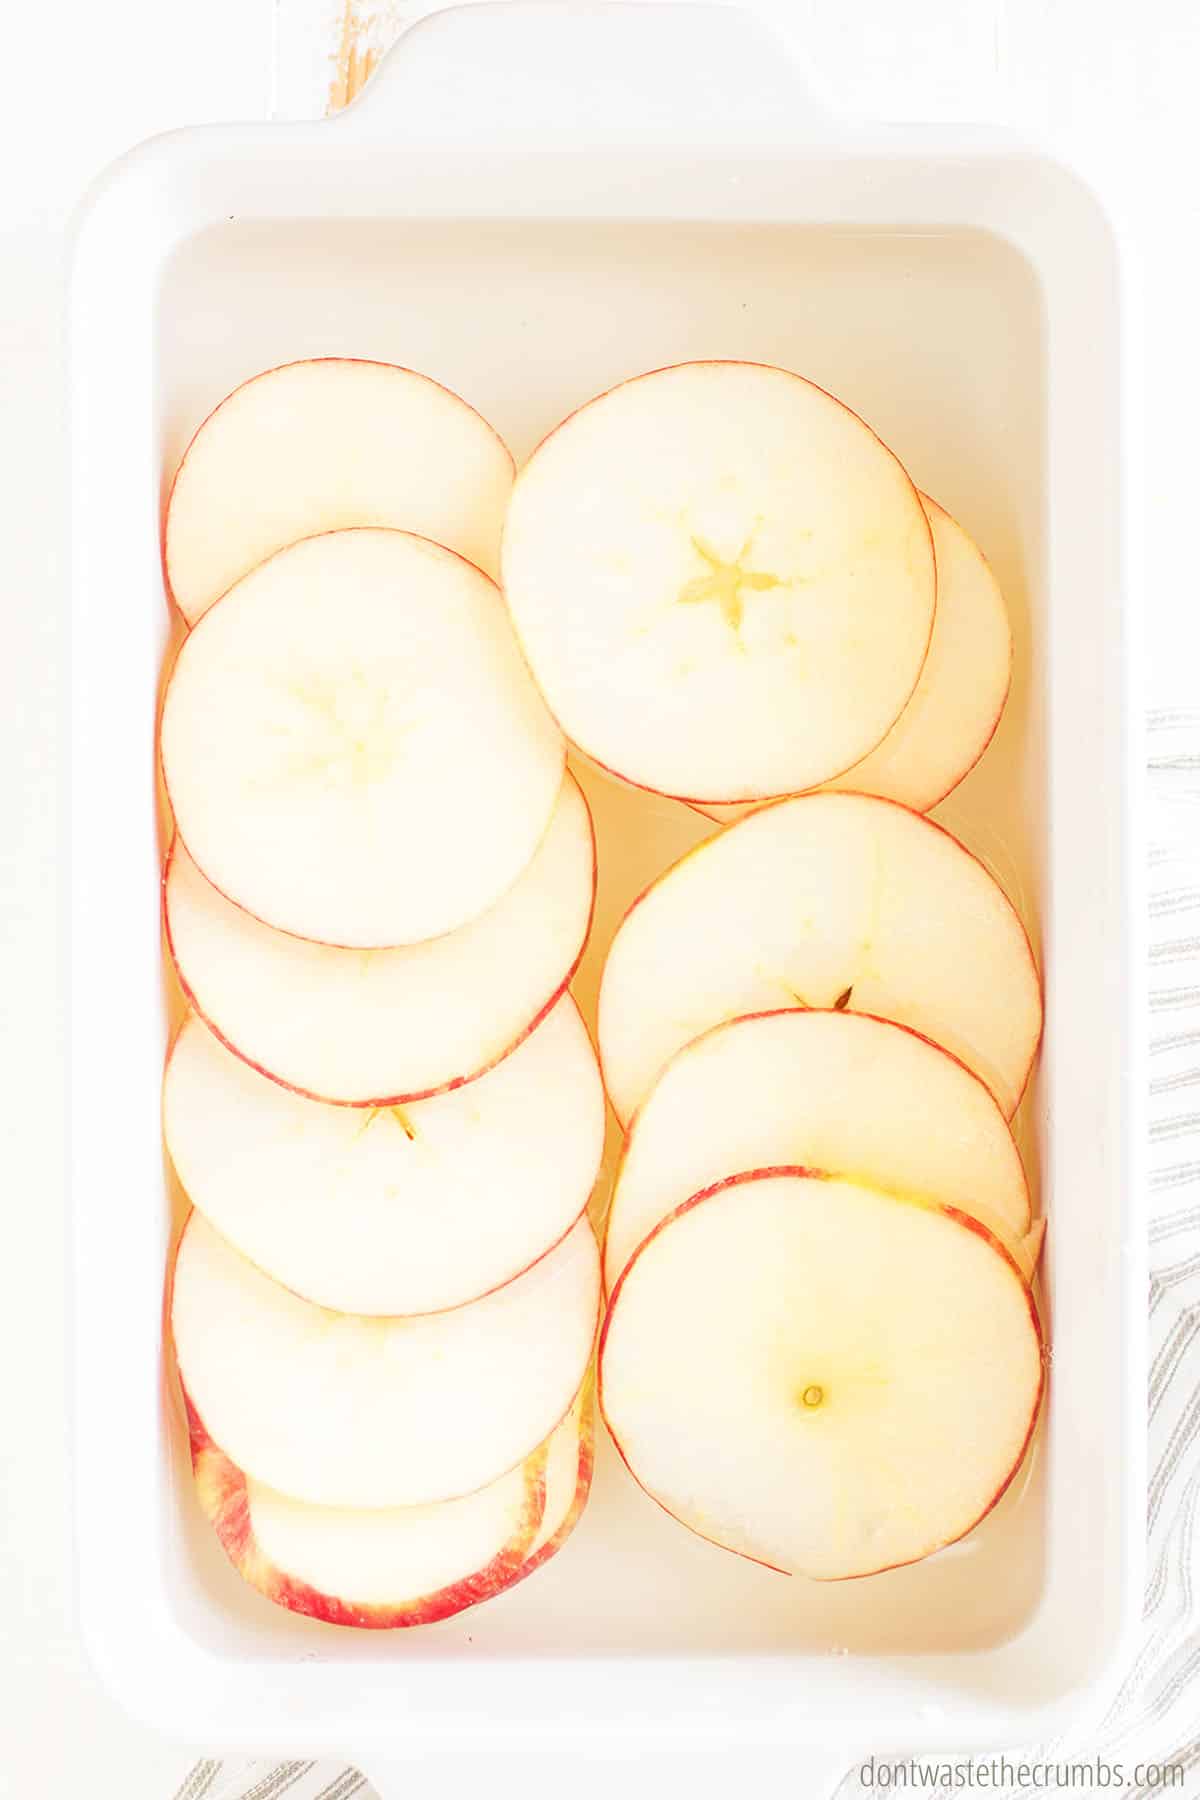 sliced apples resting in a white bowl filled with water, lemon juice, and cinnamon